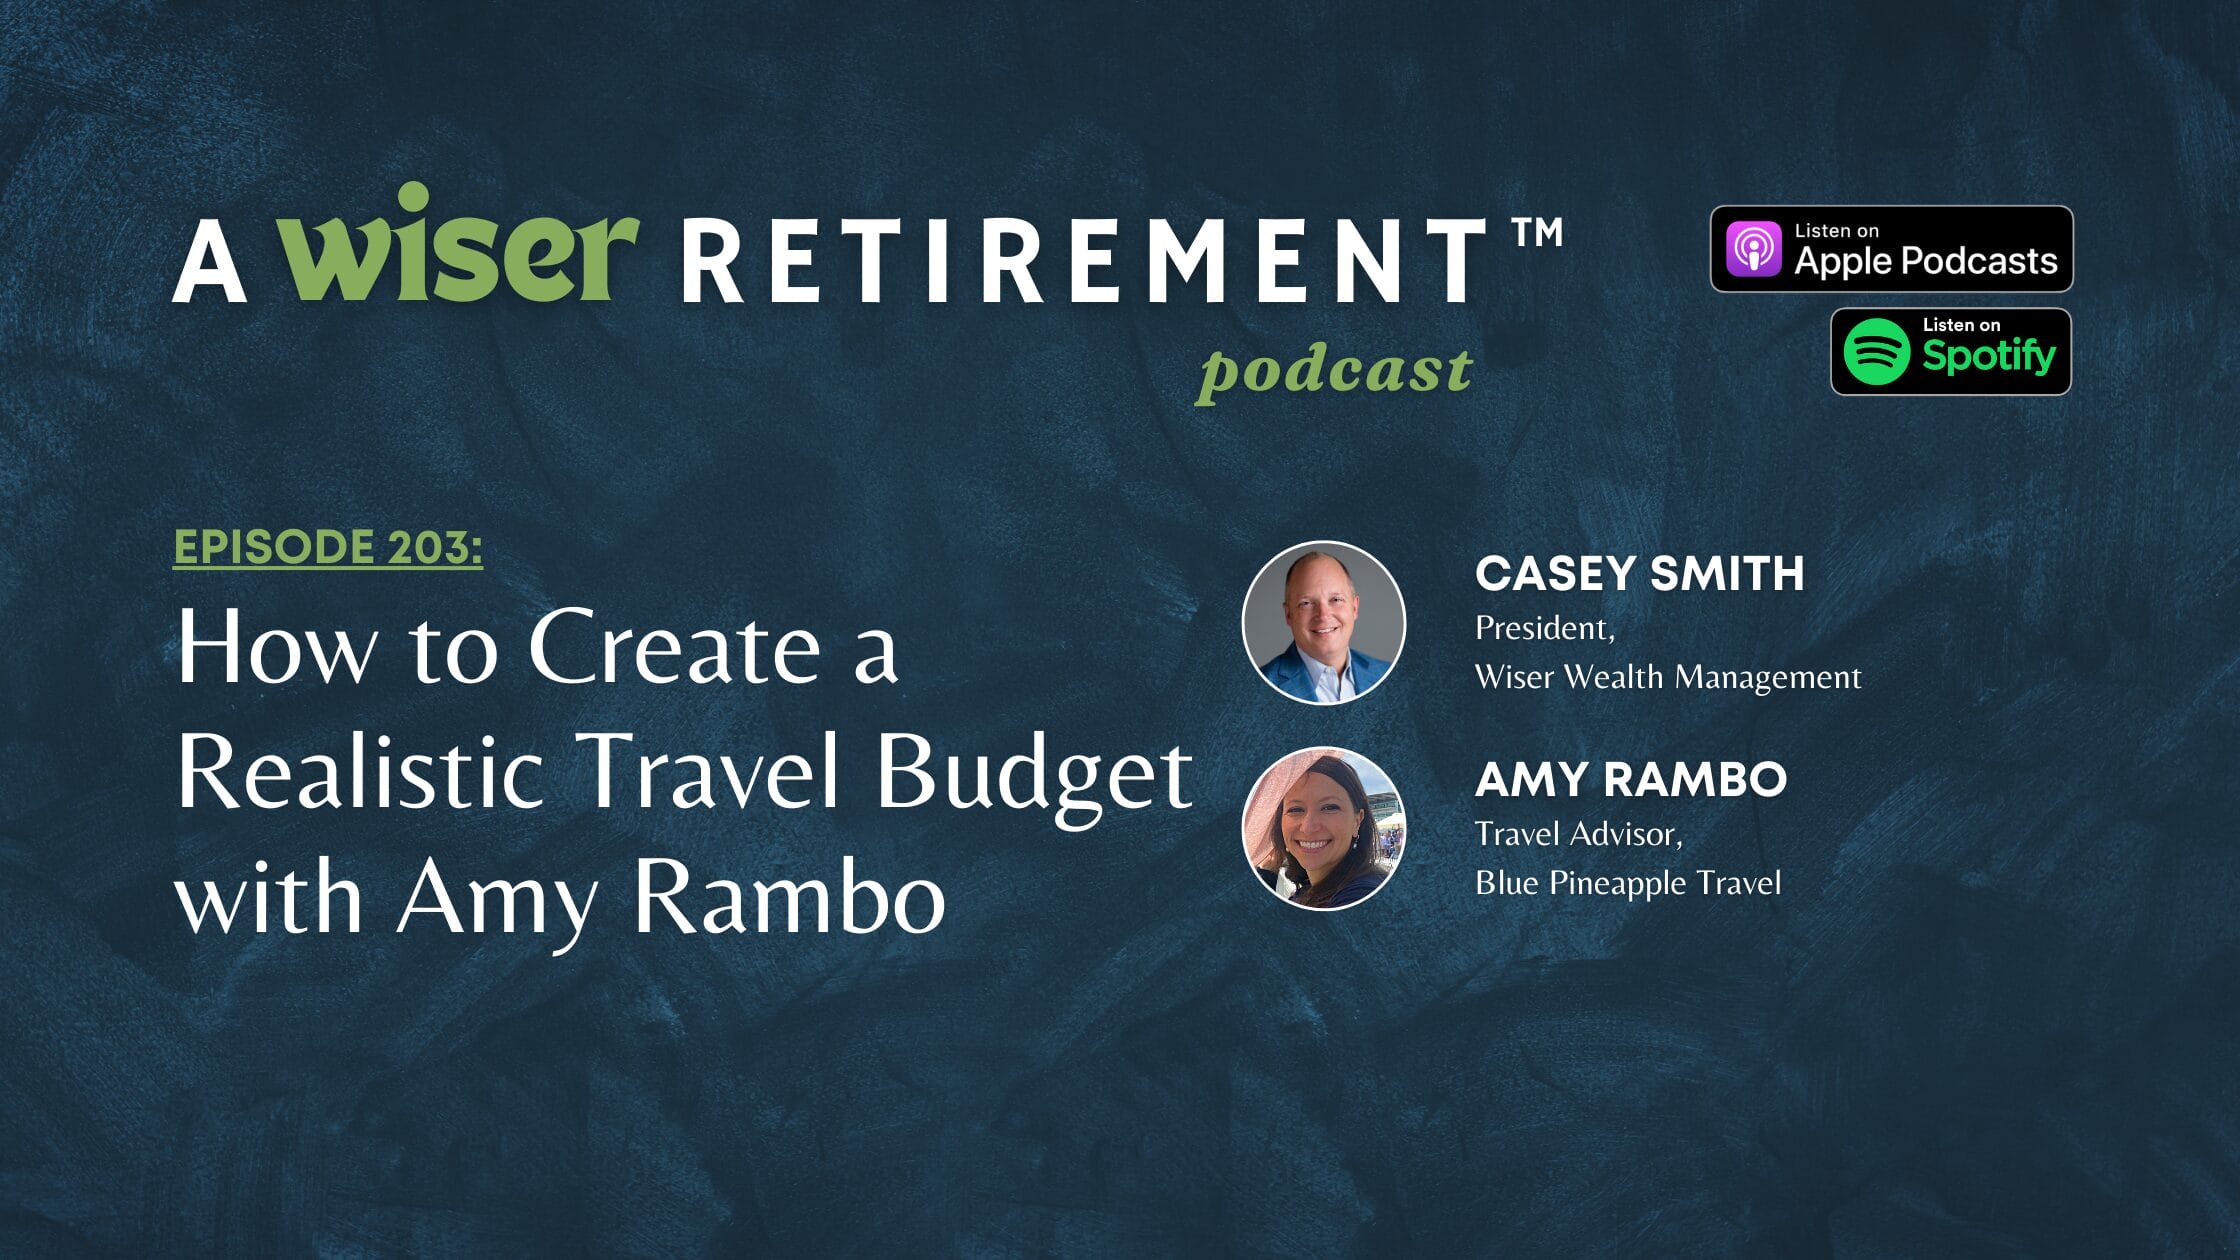 How to Create a Realistic Travel Budget with Amy Rambo